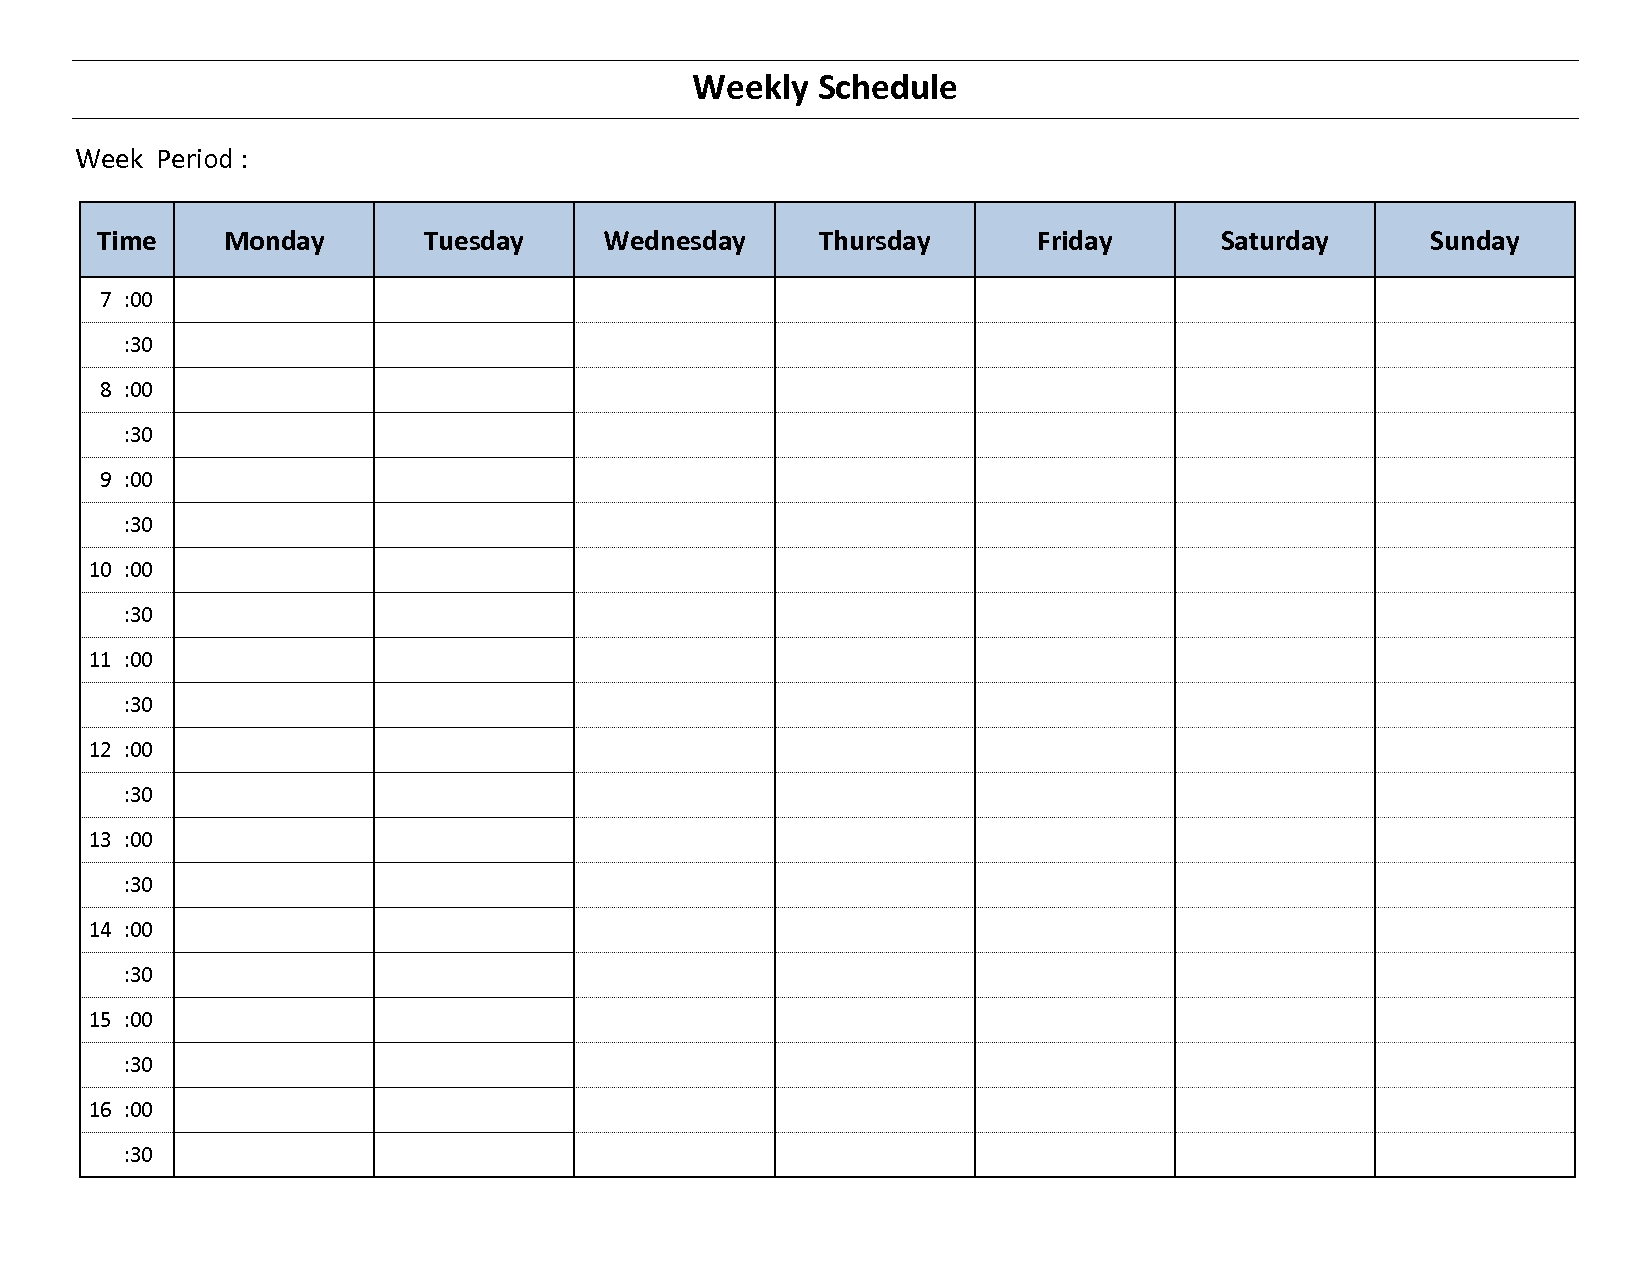 Weekly Calendar With Time Slots Template | Calendar intended for Printable Daily Calendar With Time Slots